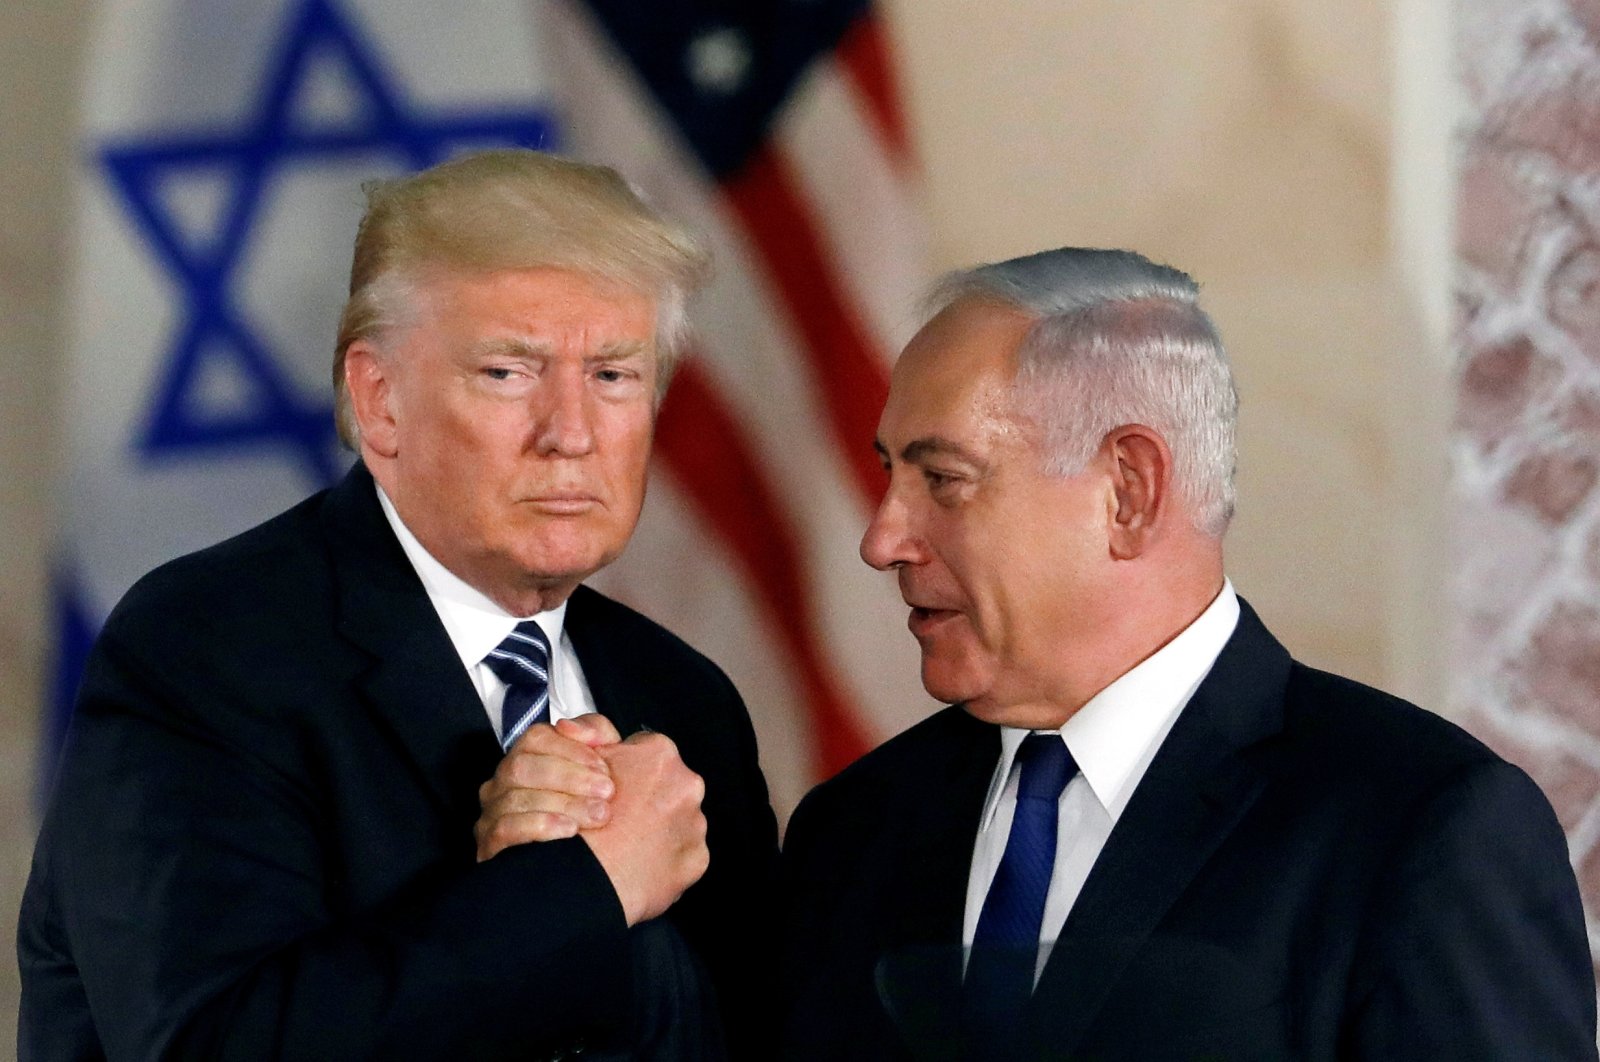 Then-U.S. President Donald Trump and former Israeli Prime Minister Benjamin Netanyahu shake hands after Trump&#039;s address at the Israel Museum in West Jerusalem, Israel, May 23, 2017.  (Reuters File Photo)